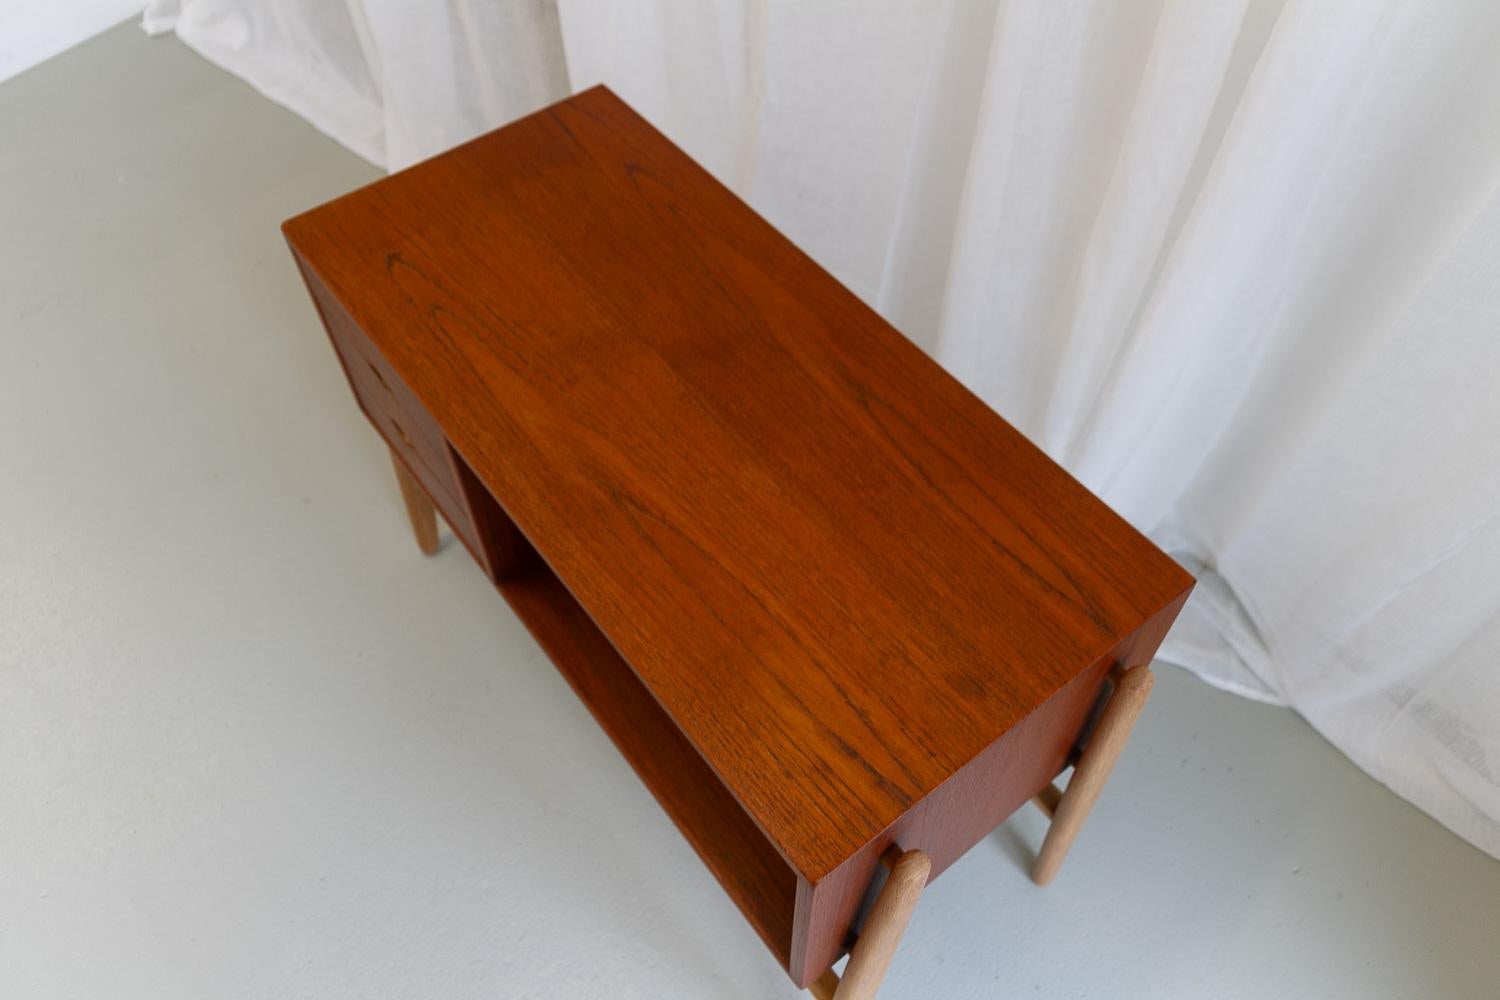 Danish Modern Teak and Oak Console Table with Cane Shelf, 1960s For Sale 6